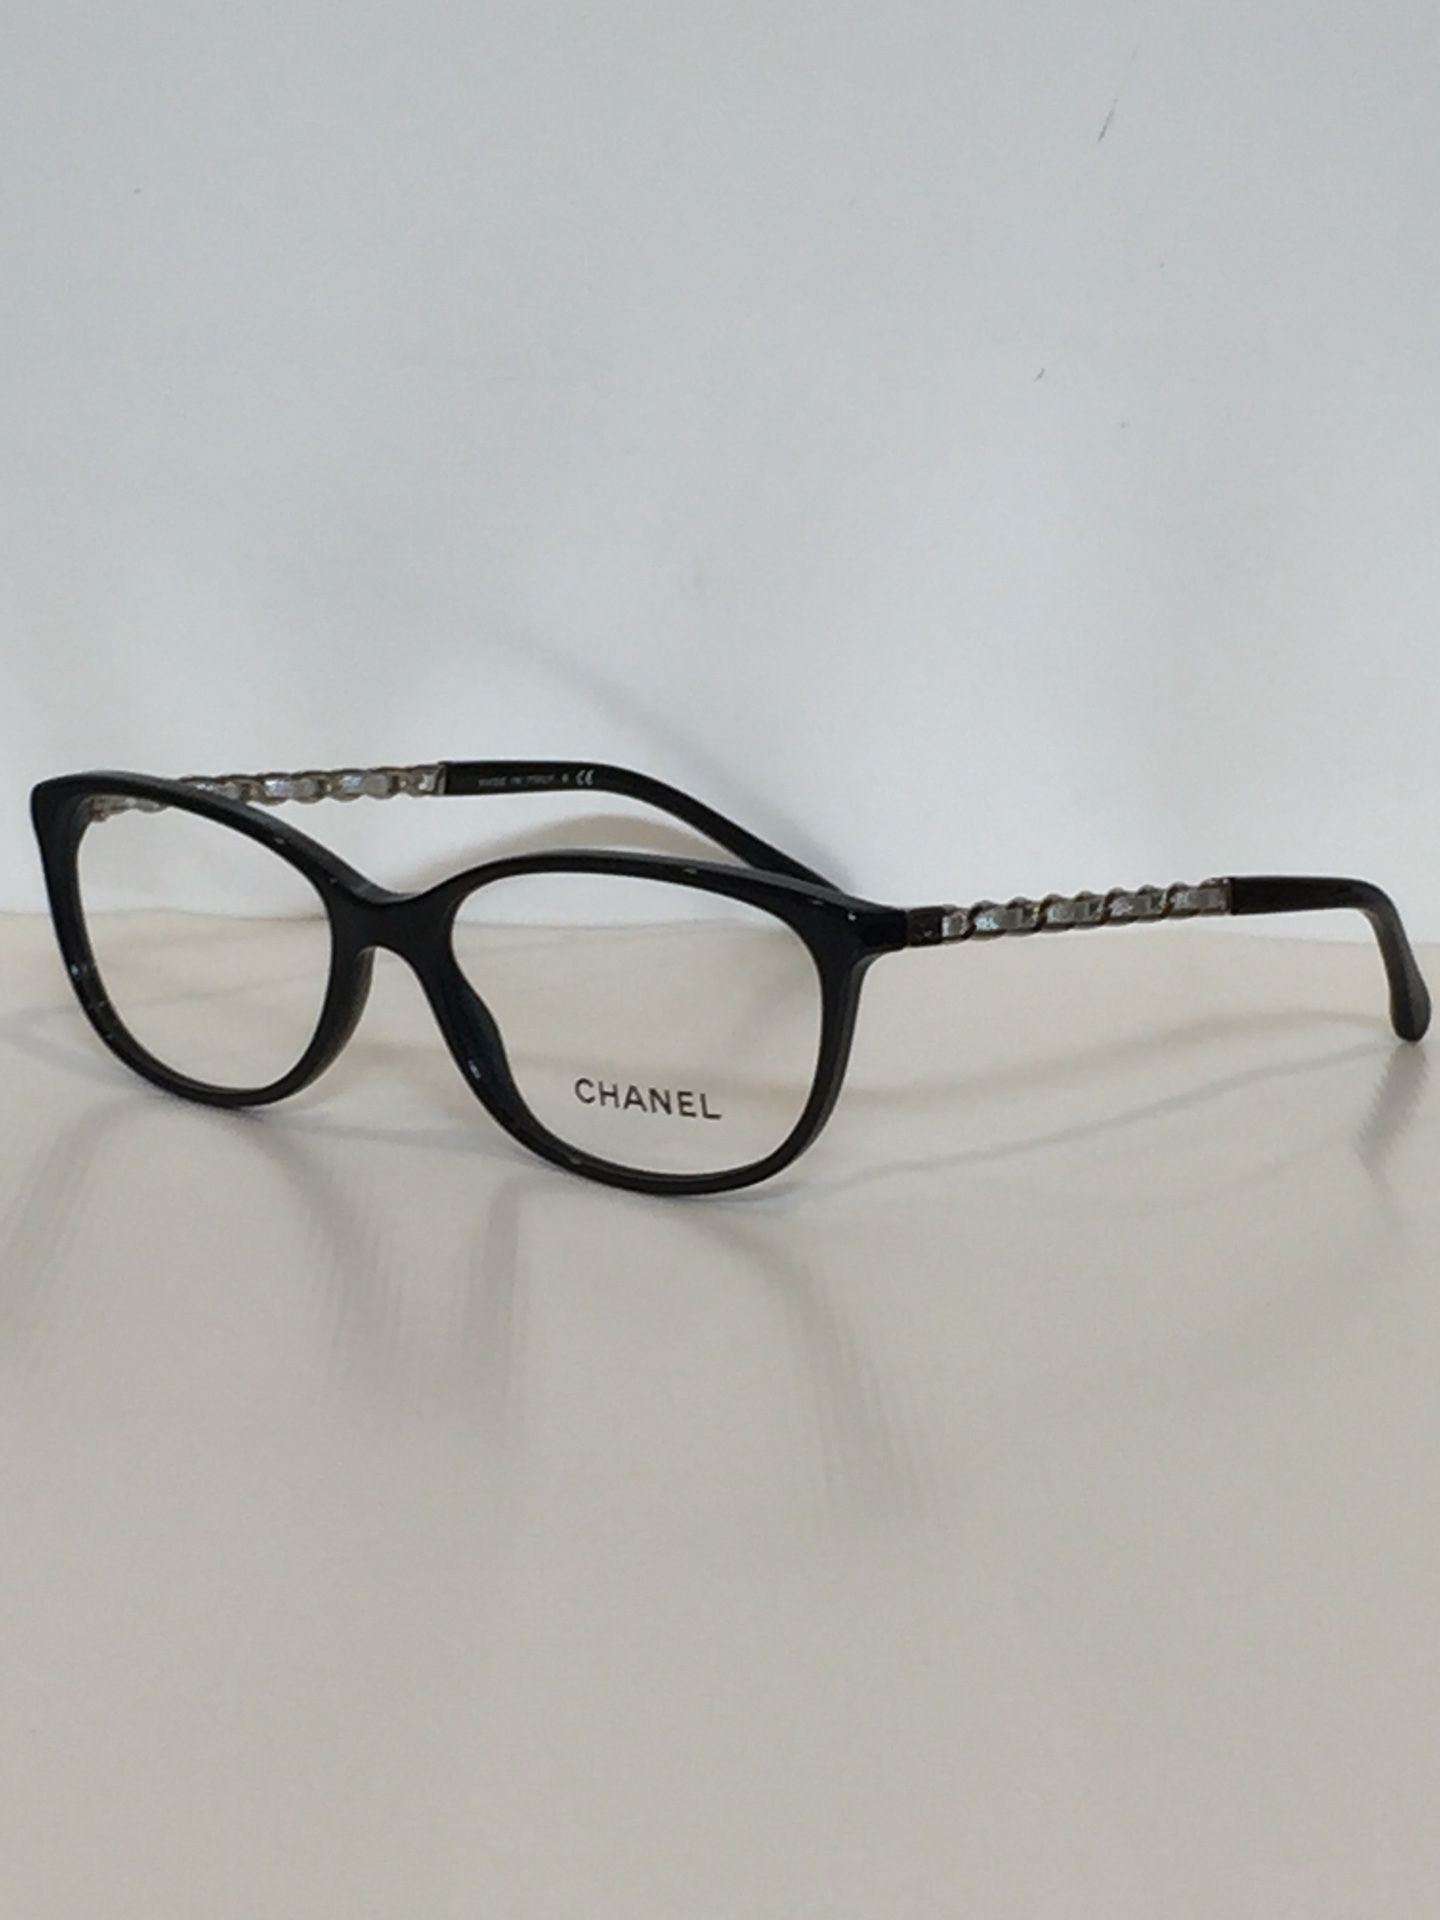 Chanel 3221-Q c.1074?black oval plastic silver arms Eyeglasses for